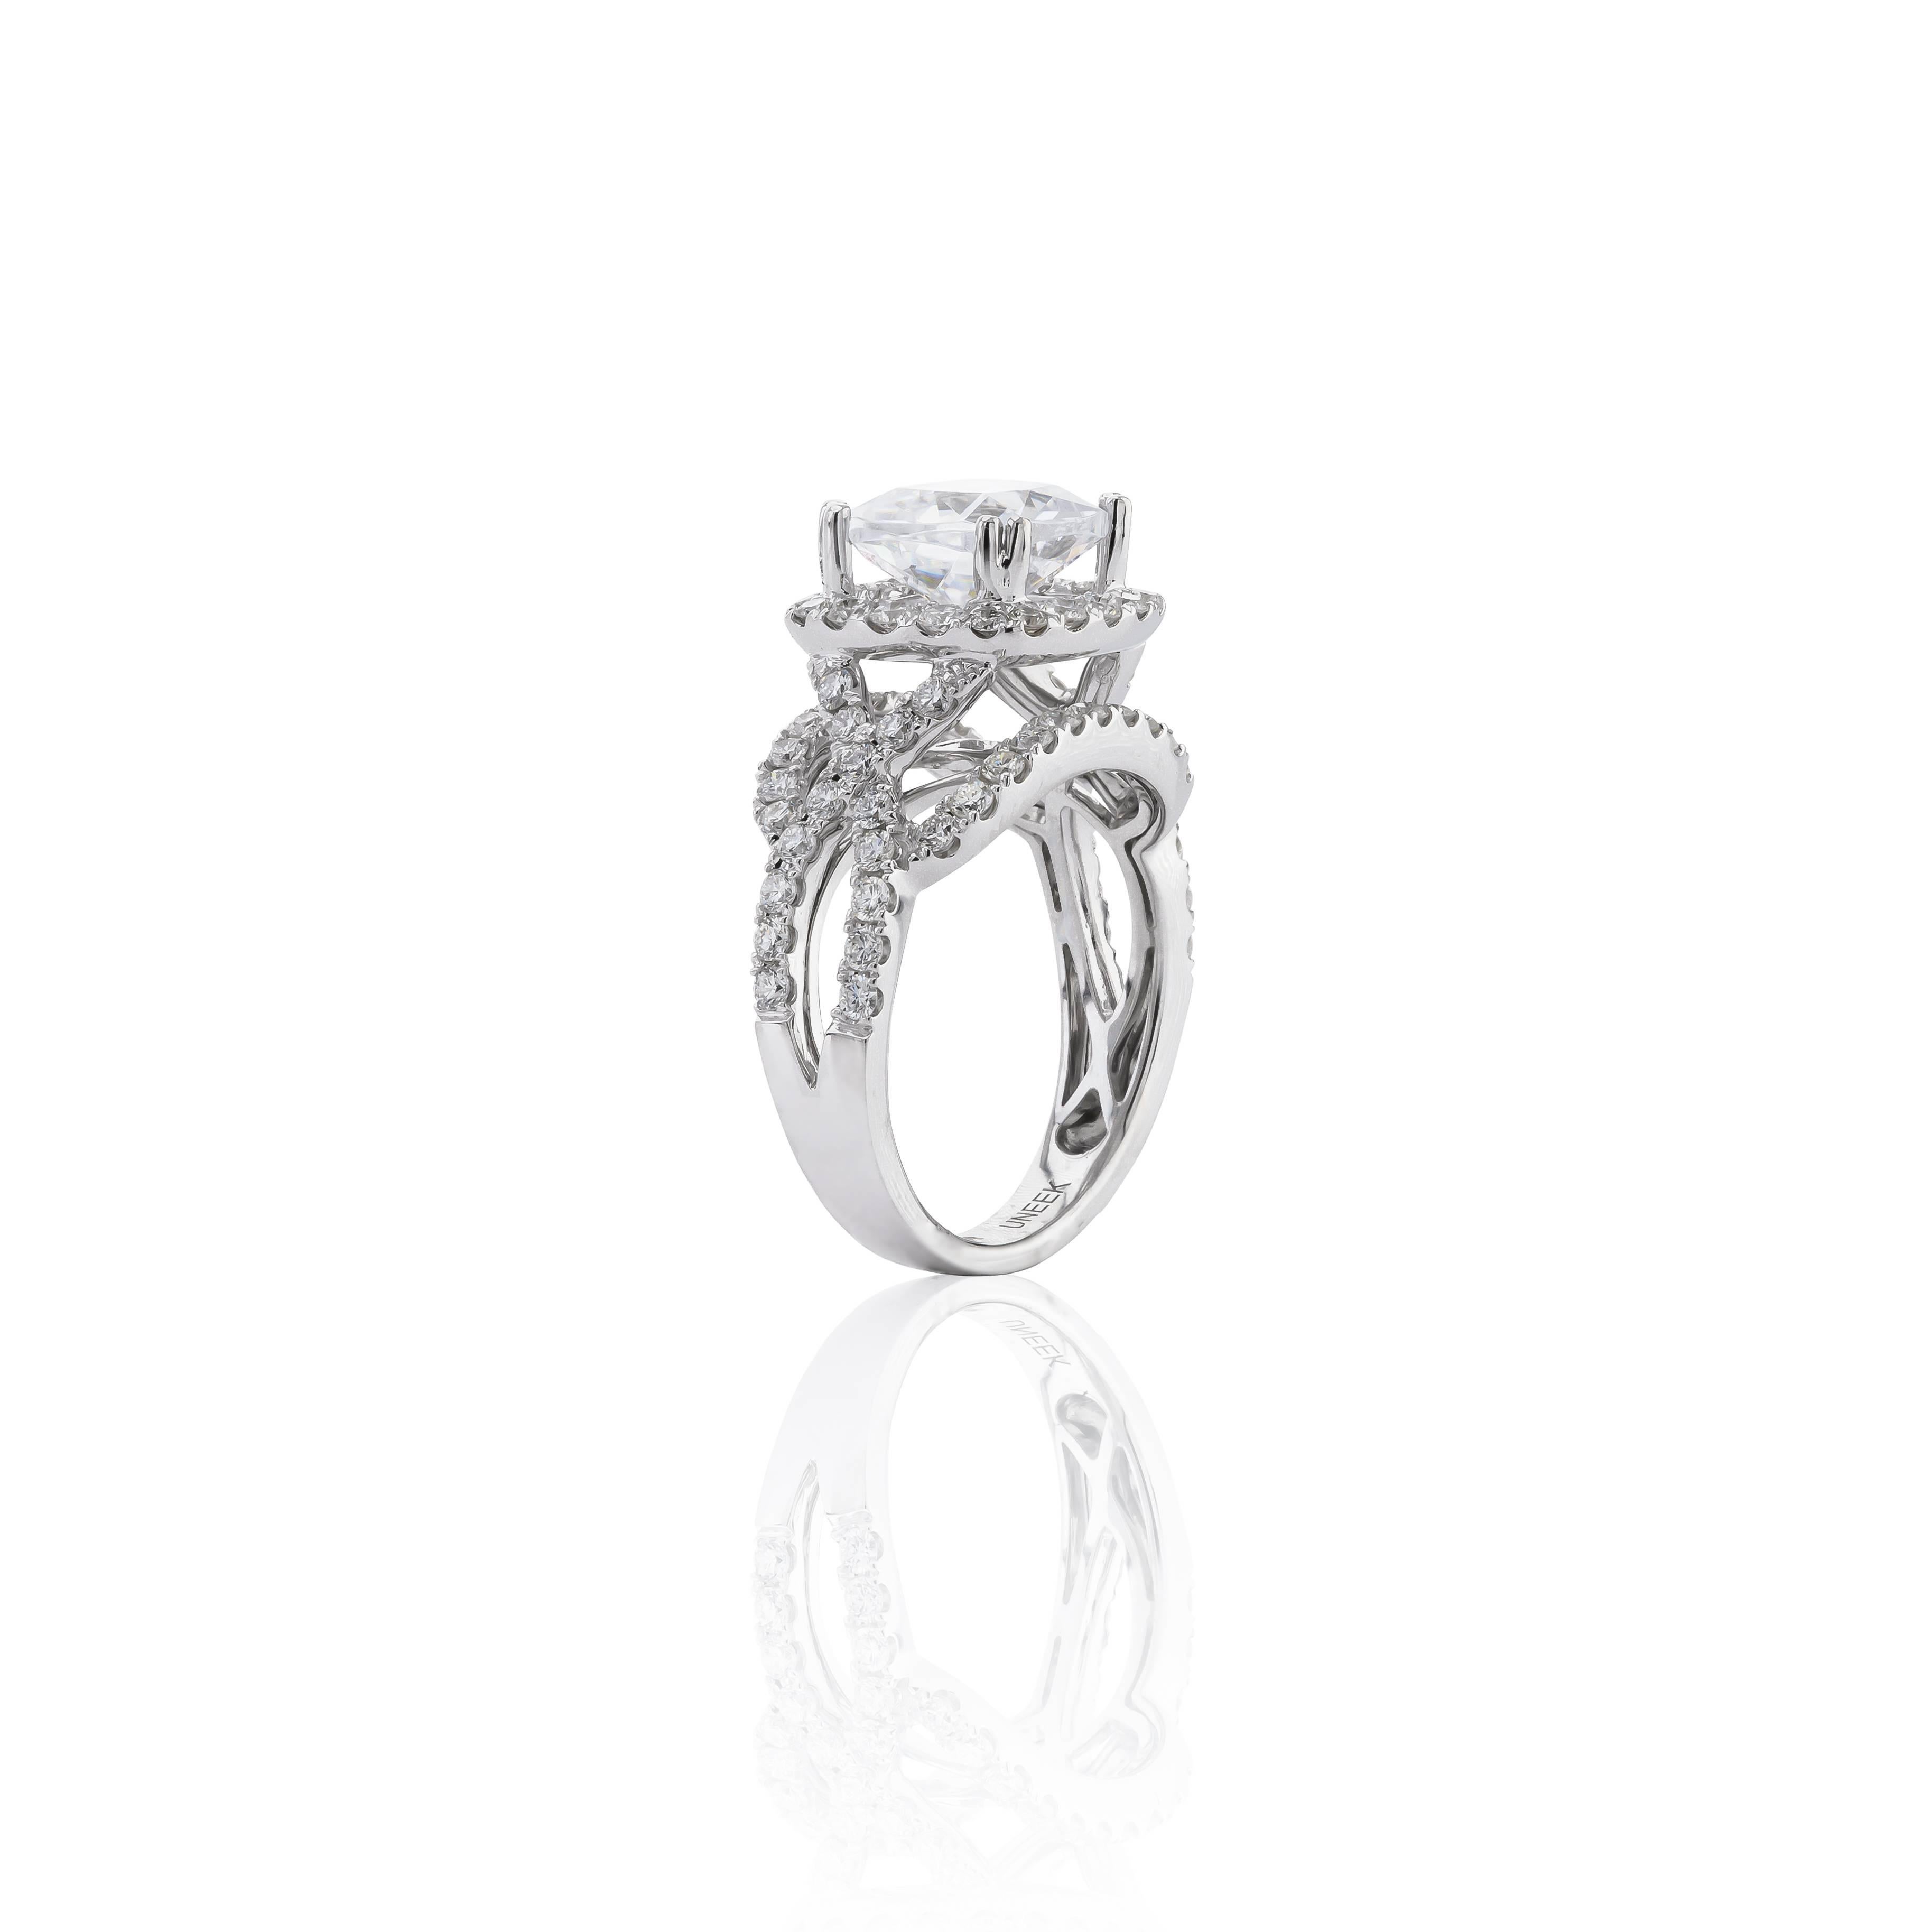 14K White Gold Semi-Mount Ring with 1.40ctw Diamonds.  Center fits 8.5mmx8.5mm.  Center Stone is CZ.  Made by Award Winning Designer Benjamin Javahari at Uneek Designs.  Ring can be sized to fit. 
Currently sized 6.5.  